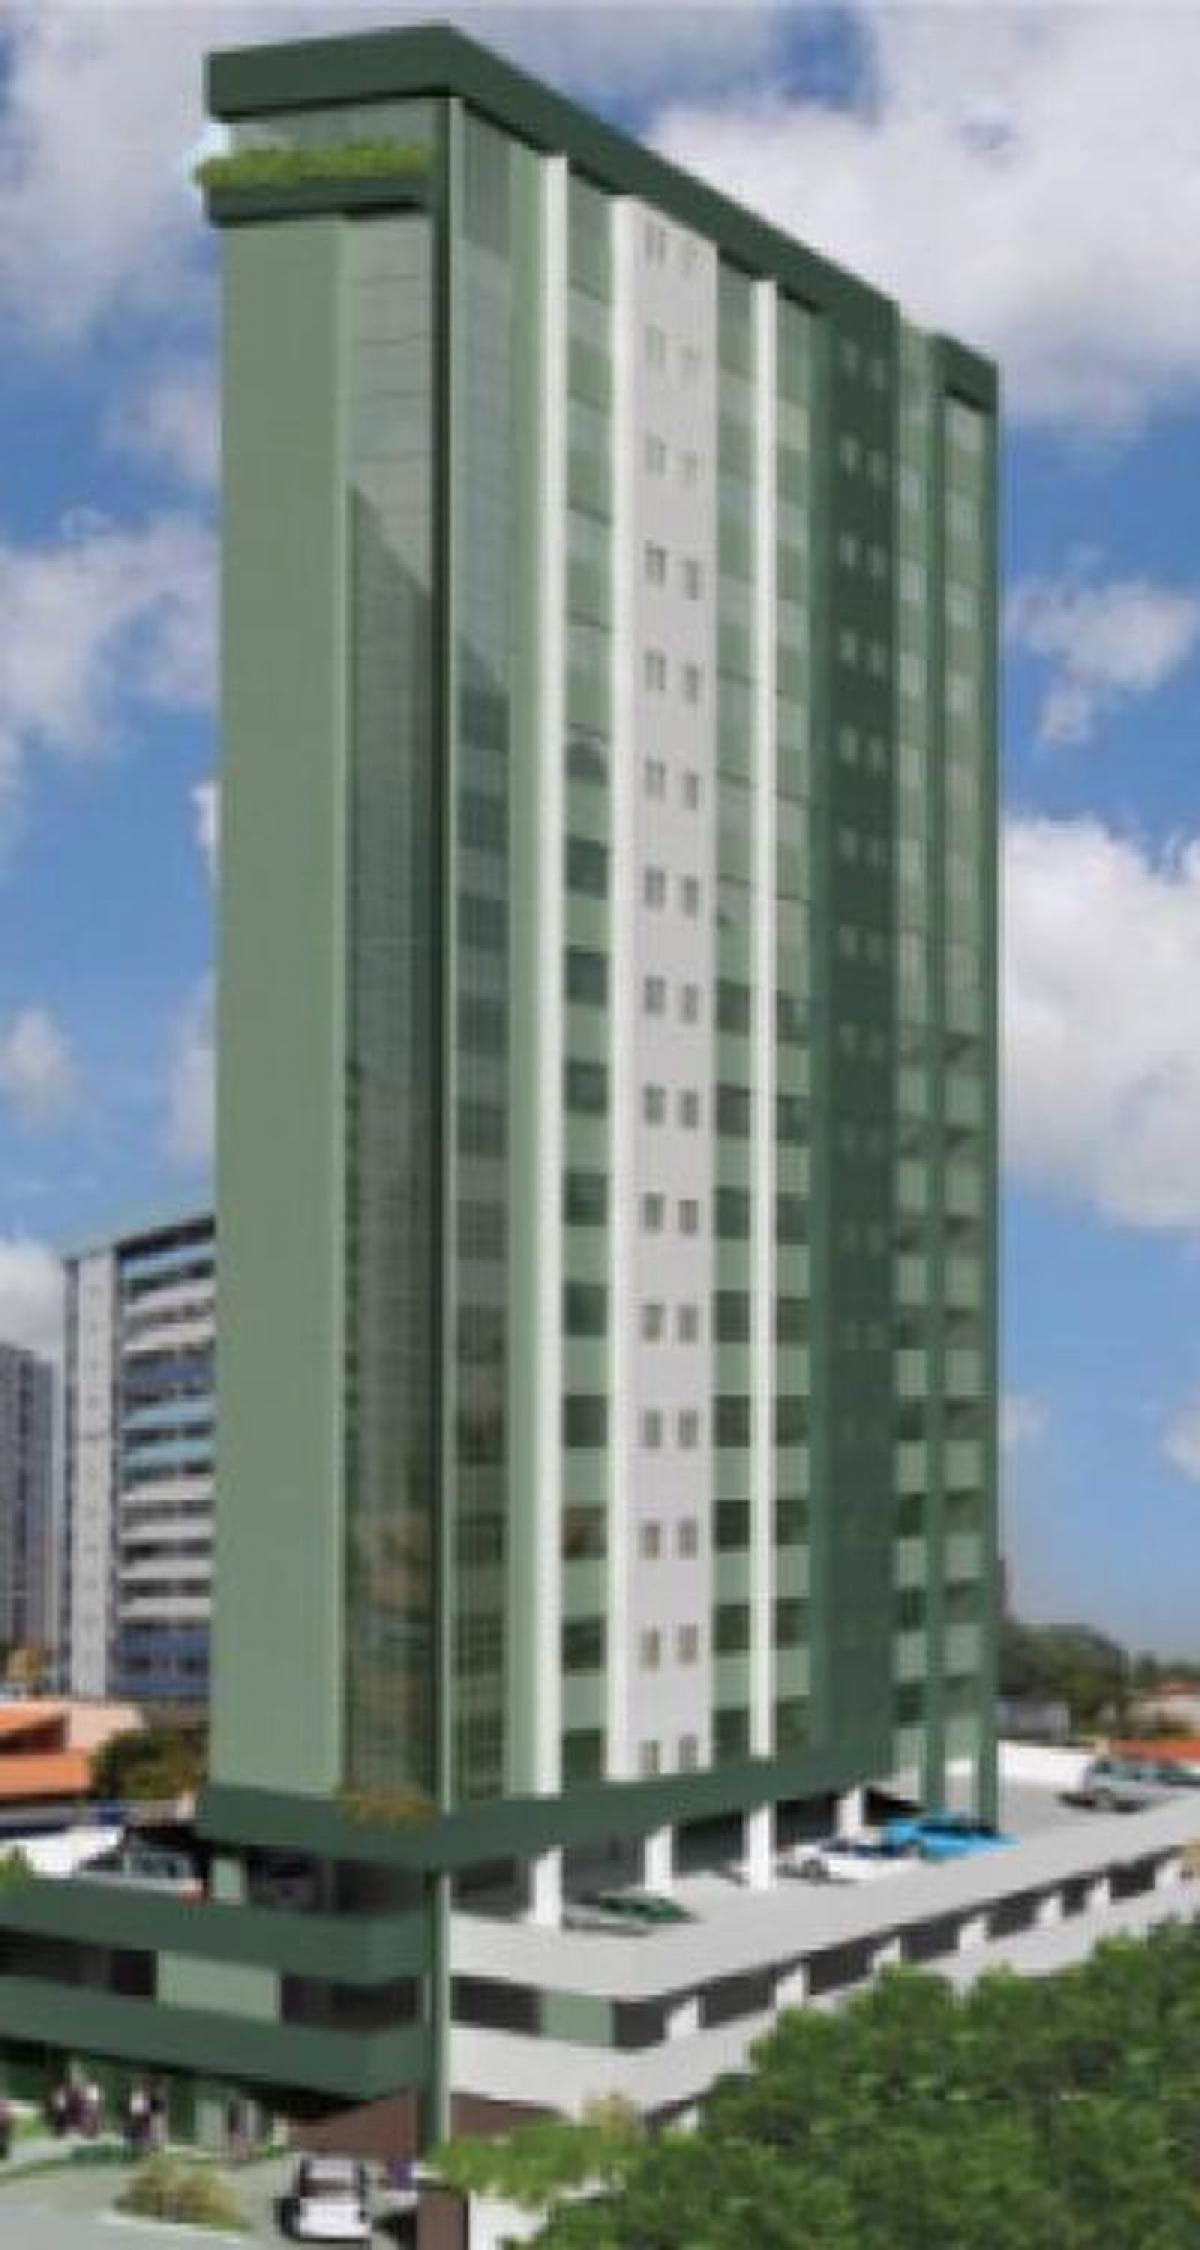 Picture of Commercial Building For Sale in Pernambuco, Pernambuco, Brazil